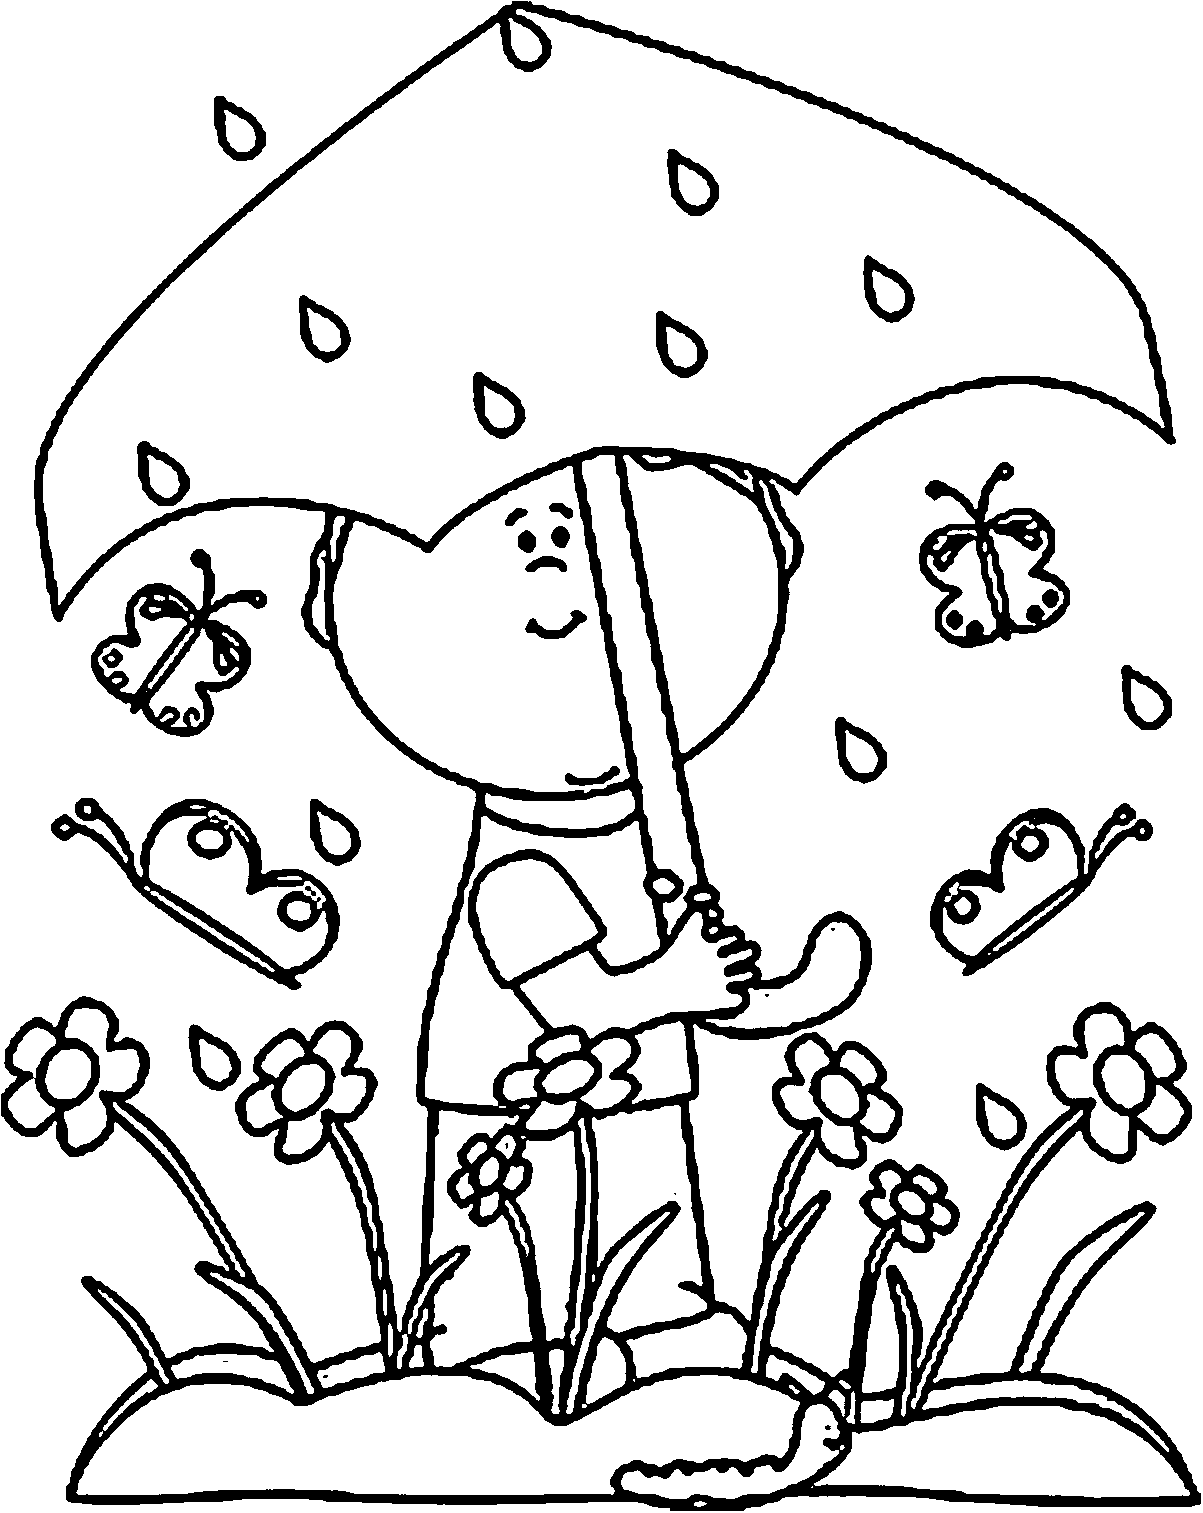 Spring Butterfly Flower Umbrella Rain Coloring Page | Wecoloringpage